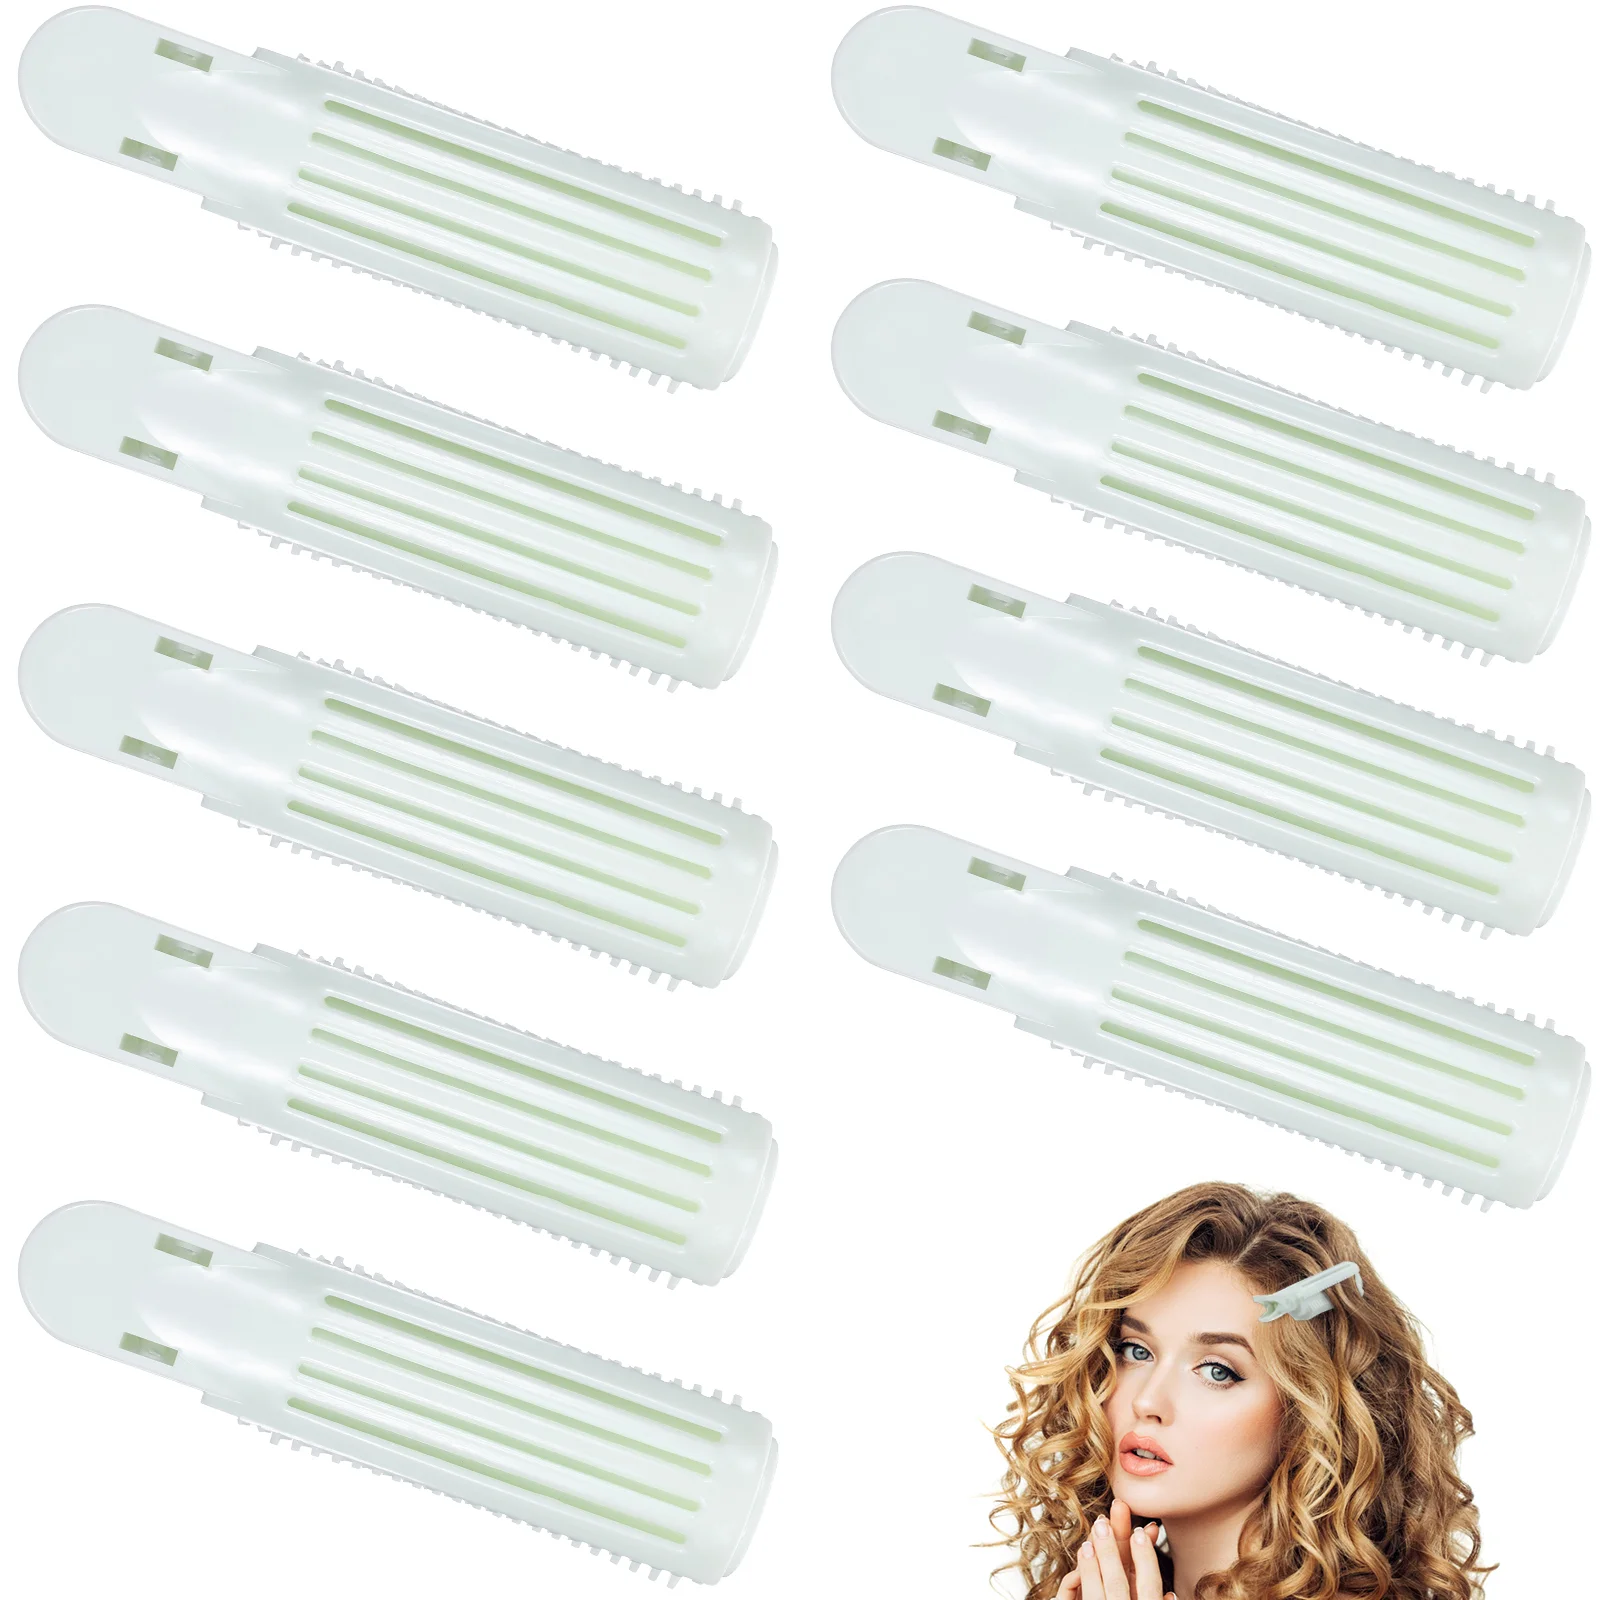 10 Pcs Curlers Bangs Clips Root for Curly Hair Volume Rollers Barrettes Volumizing Adjustable pilot aviation headset lemo airbus aircraft 6 pin plug airbus pilot headset headset adjustable volume